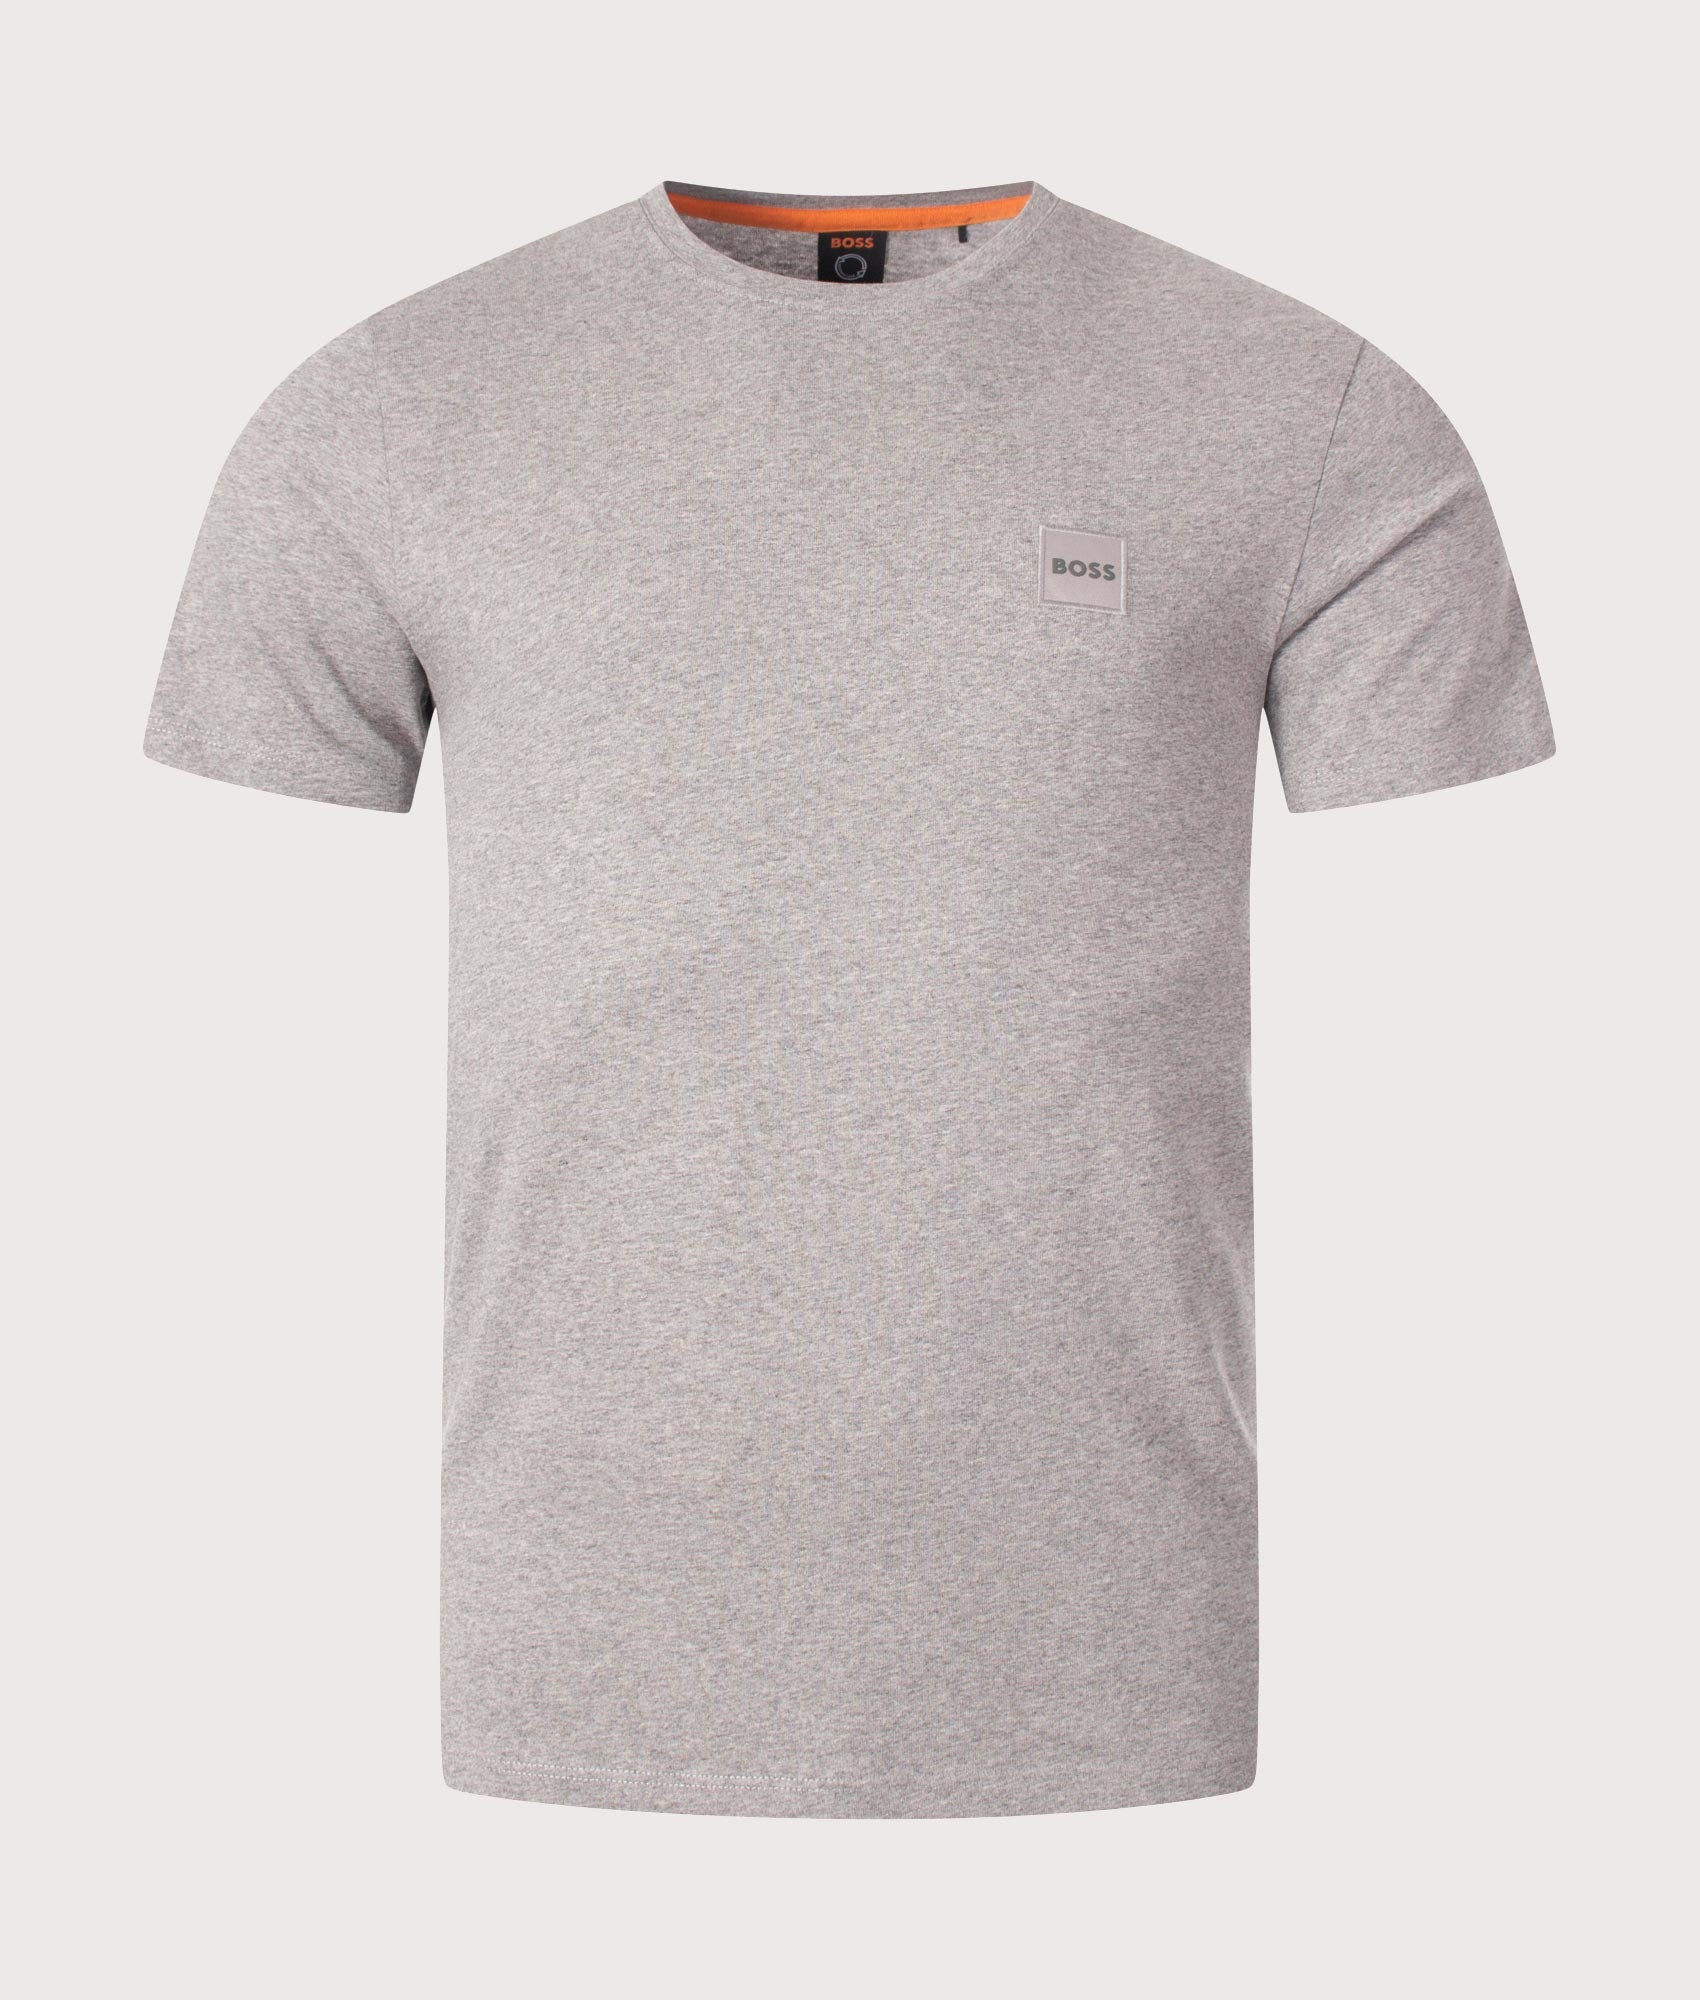 BOSS Mens Relaxed Fit Tales T-Shirt - Colour: 051 Light Pastel Grey - Size: Large